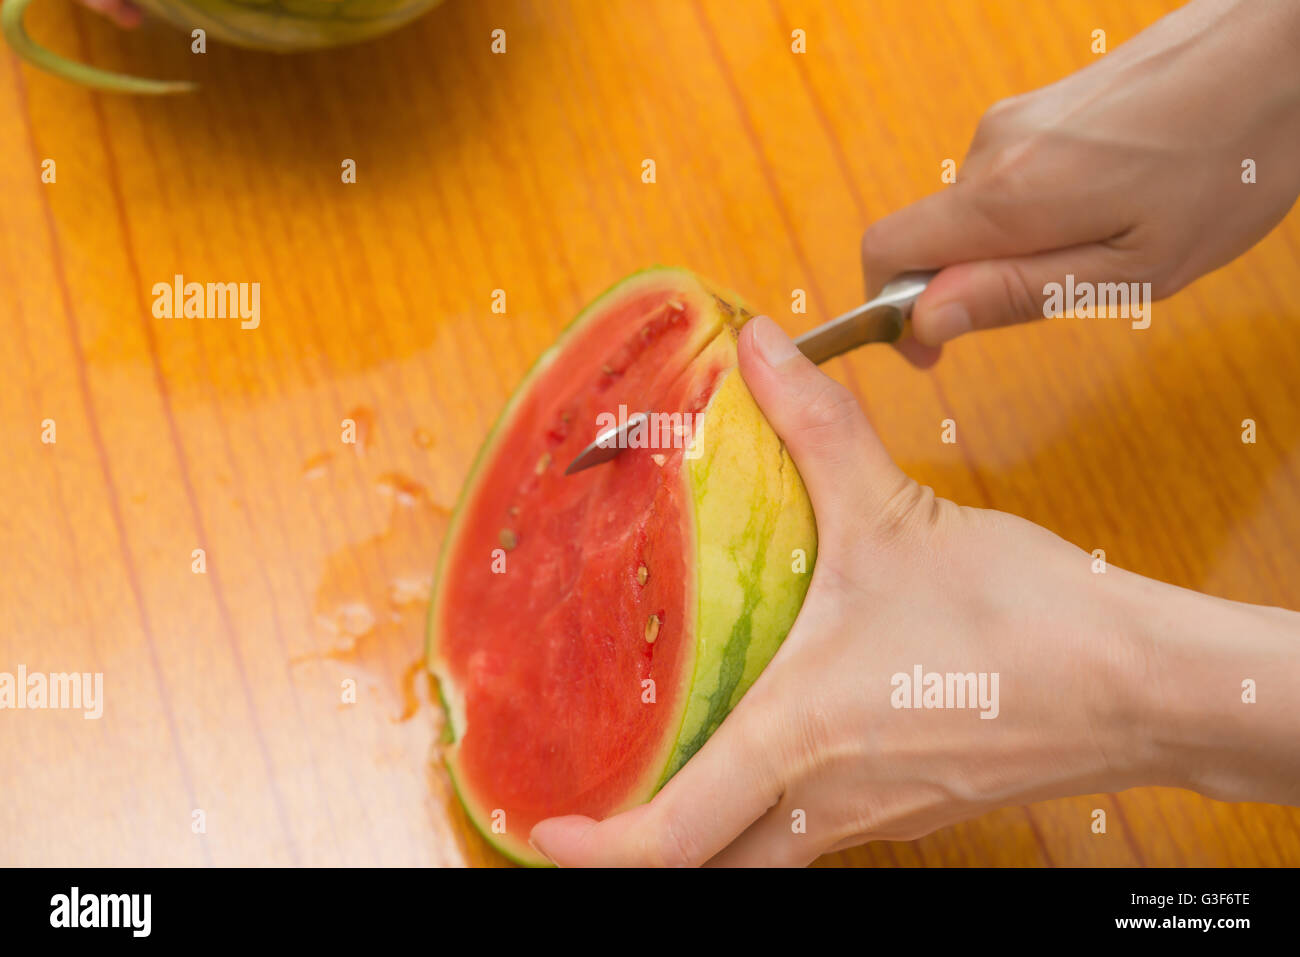 cutting a watermelon with knife on a table Stock Photo